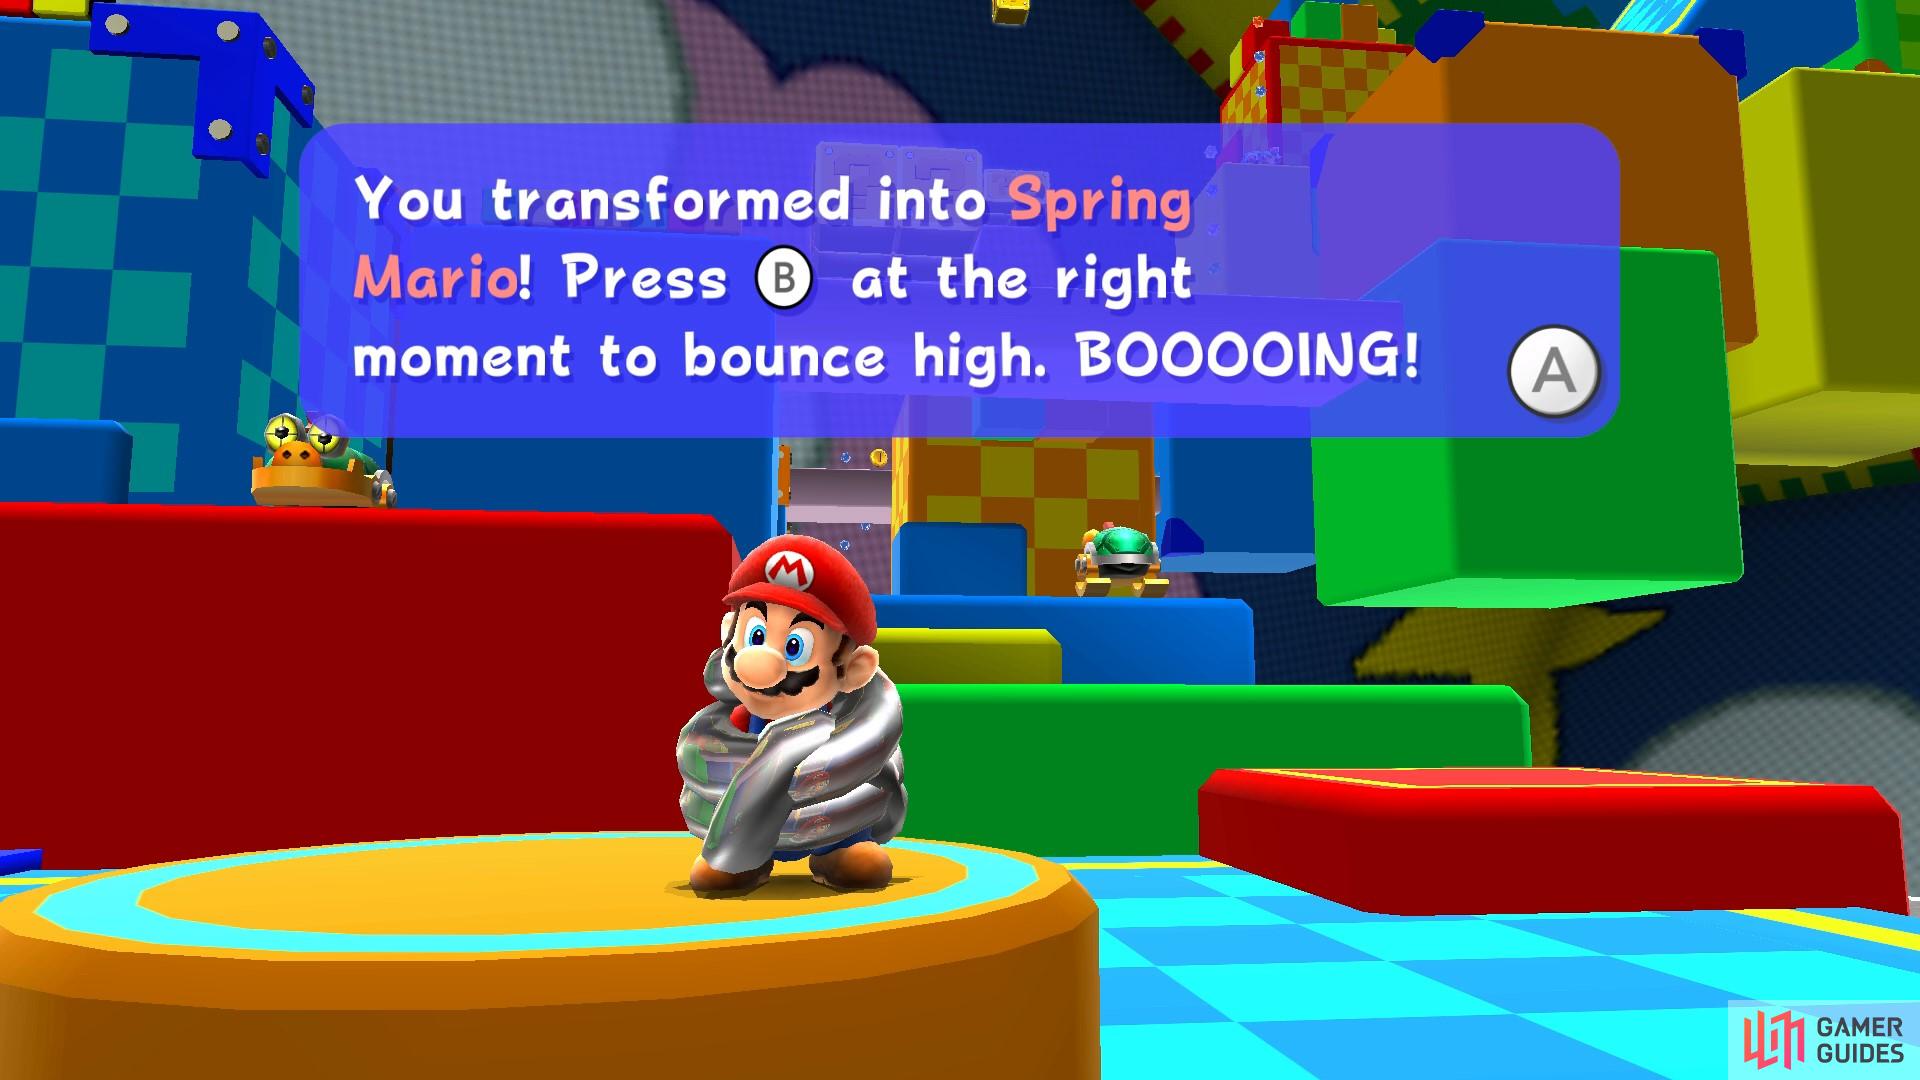 Spring Mario can jump really high but he’s tricky to control.